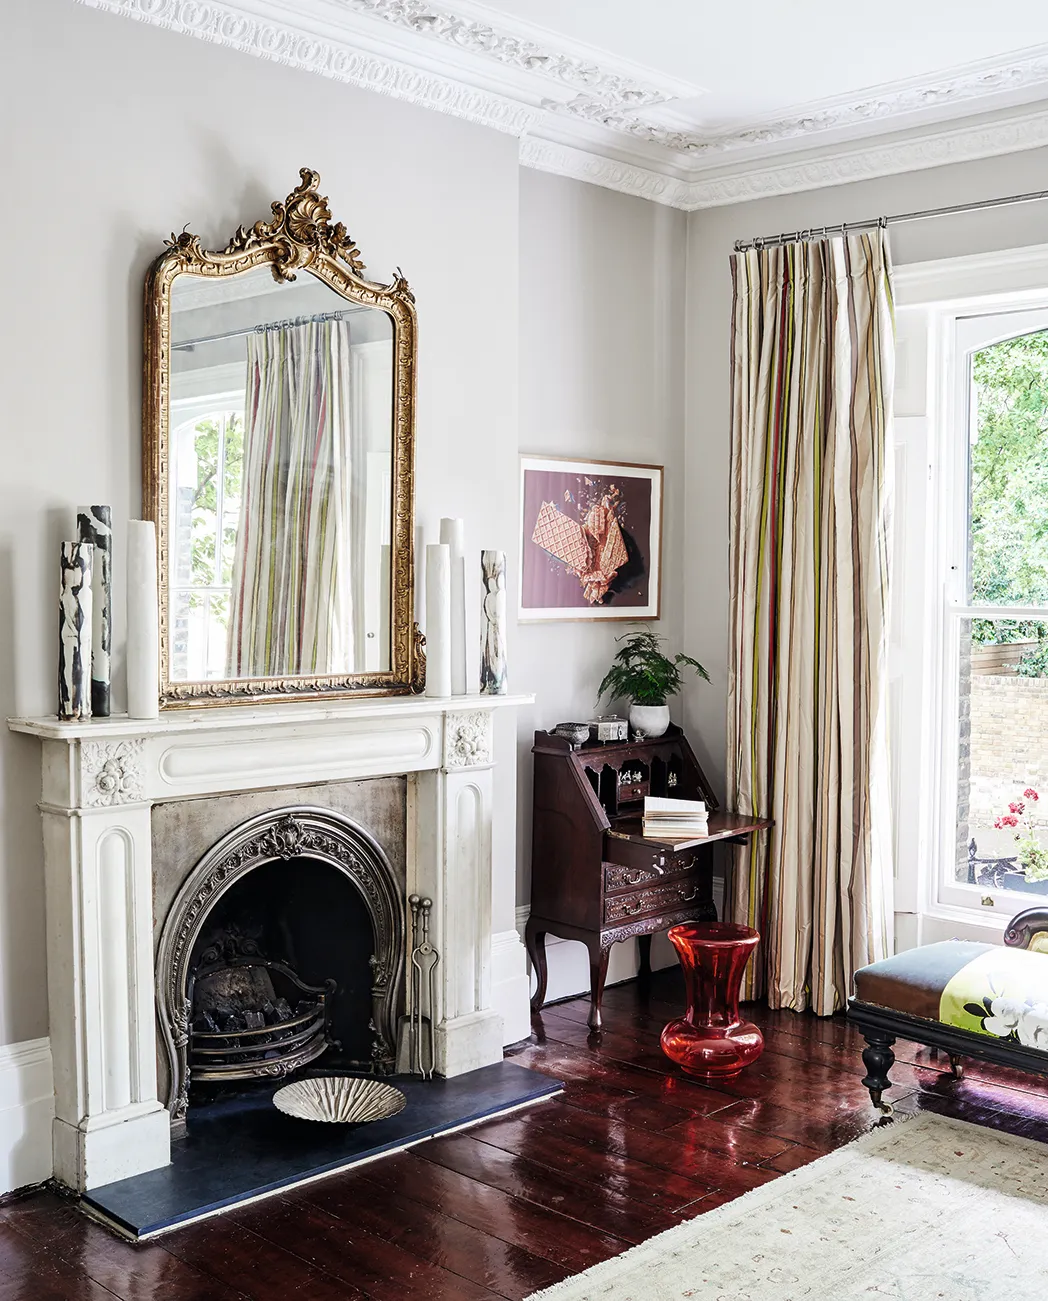 A Victorian home embracing historic features and modern style